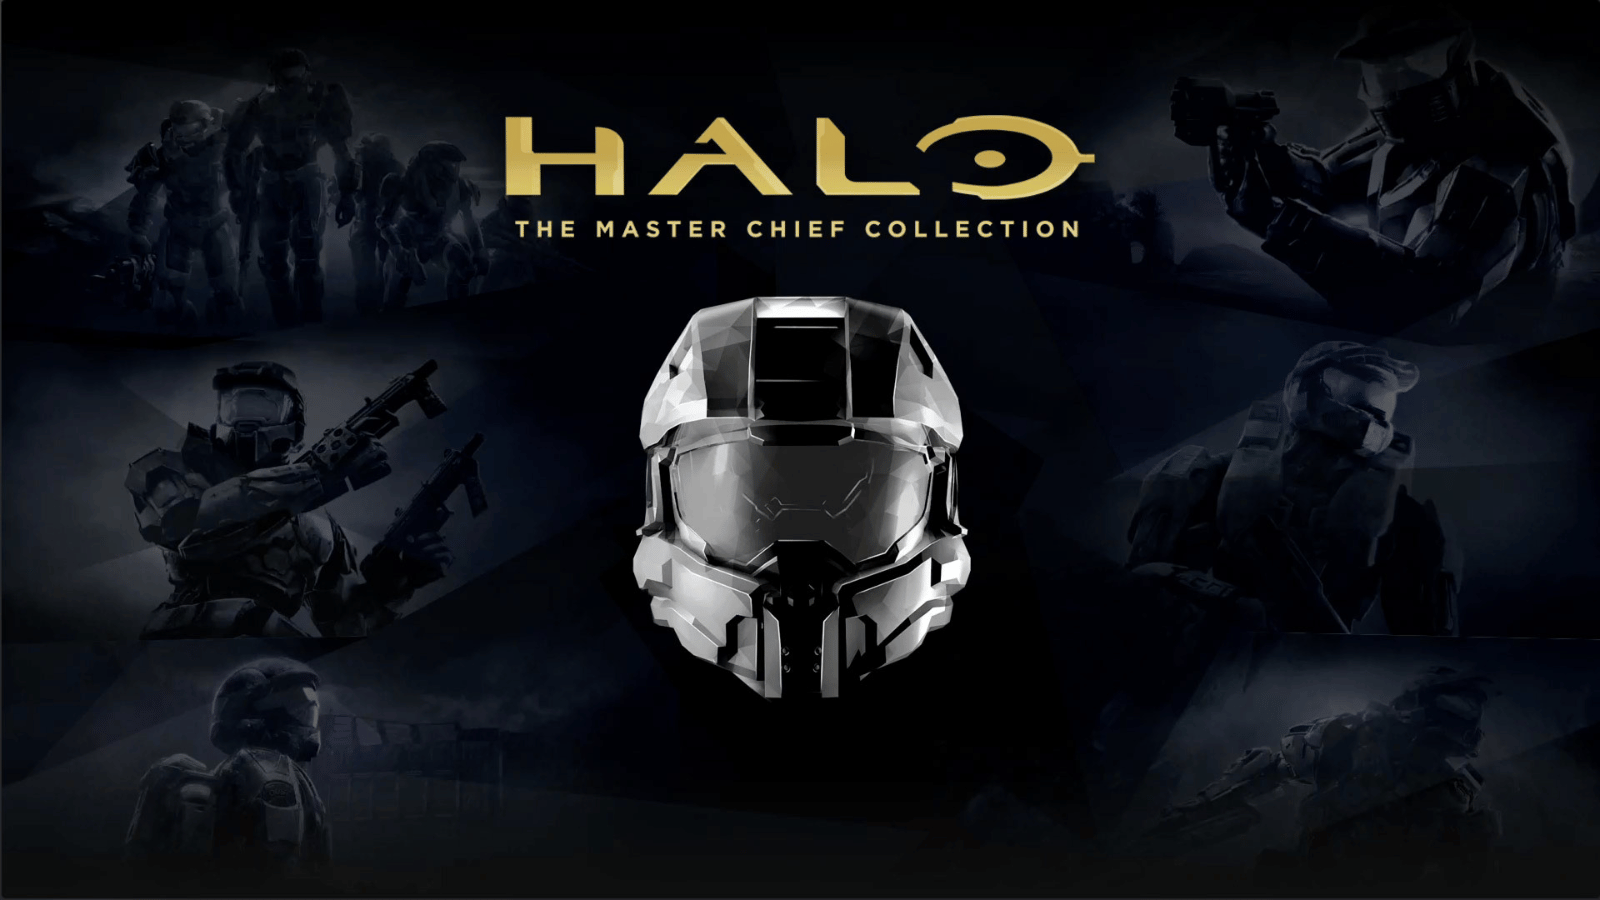 Halo: The Master Chief Collection Xbox Gamepass